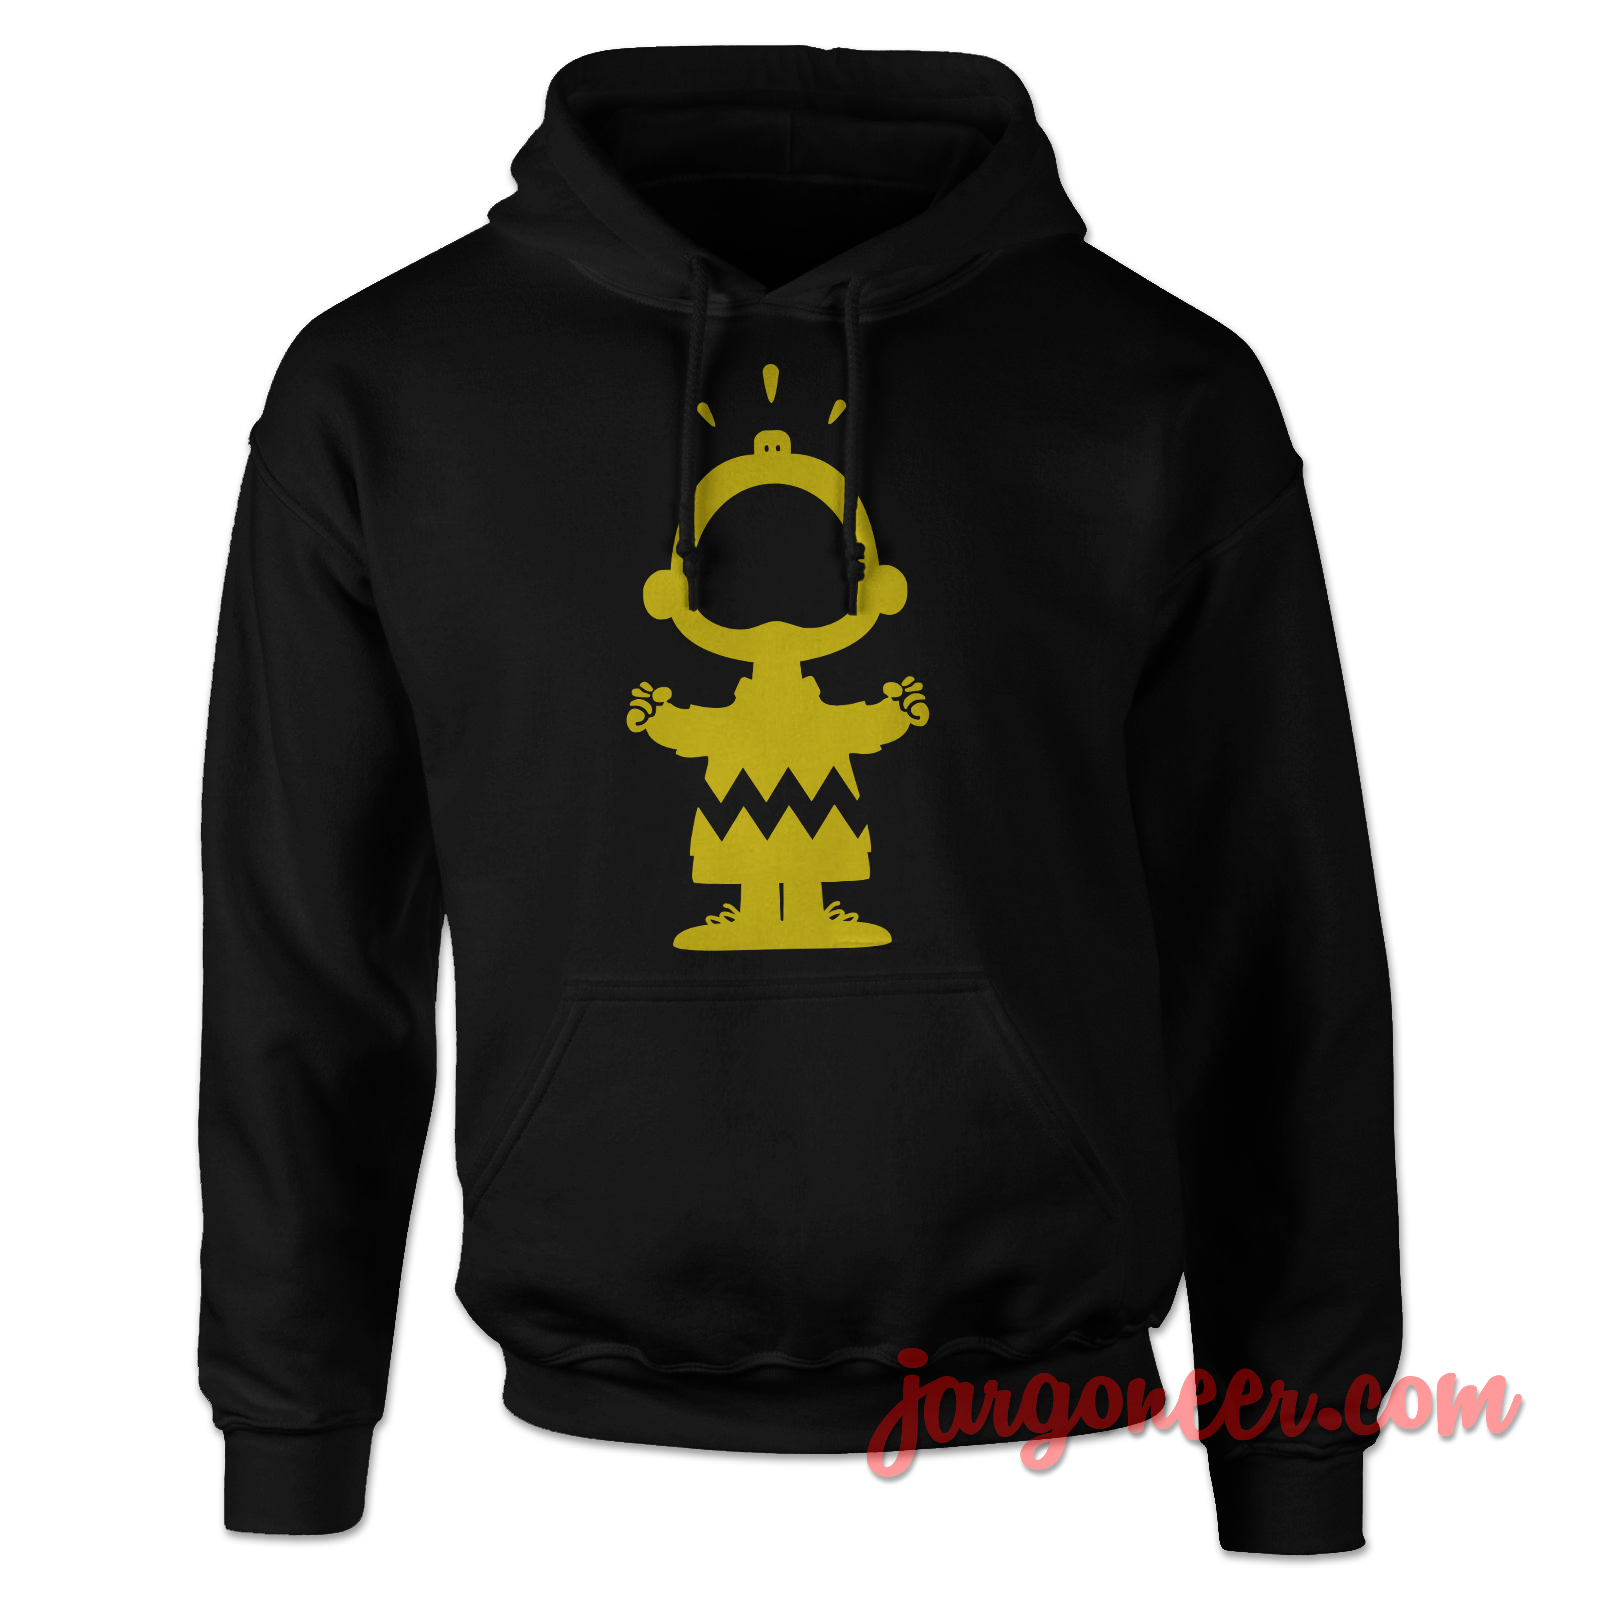 Charlie Whooaaa Black Hoody - Shop Unique Graphic Cool Shirt Designs